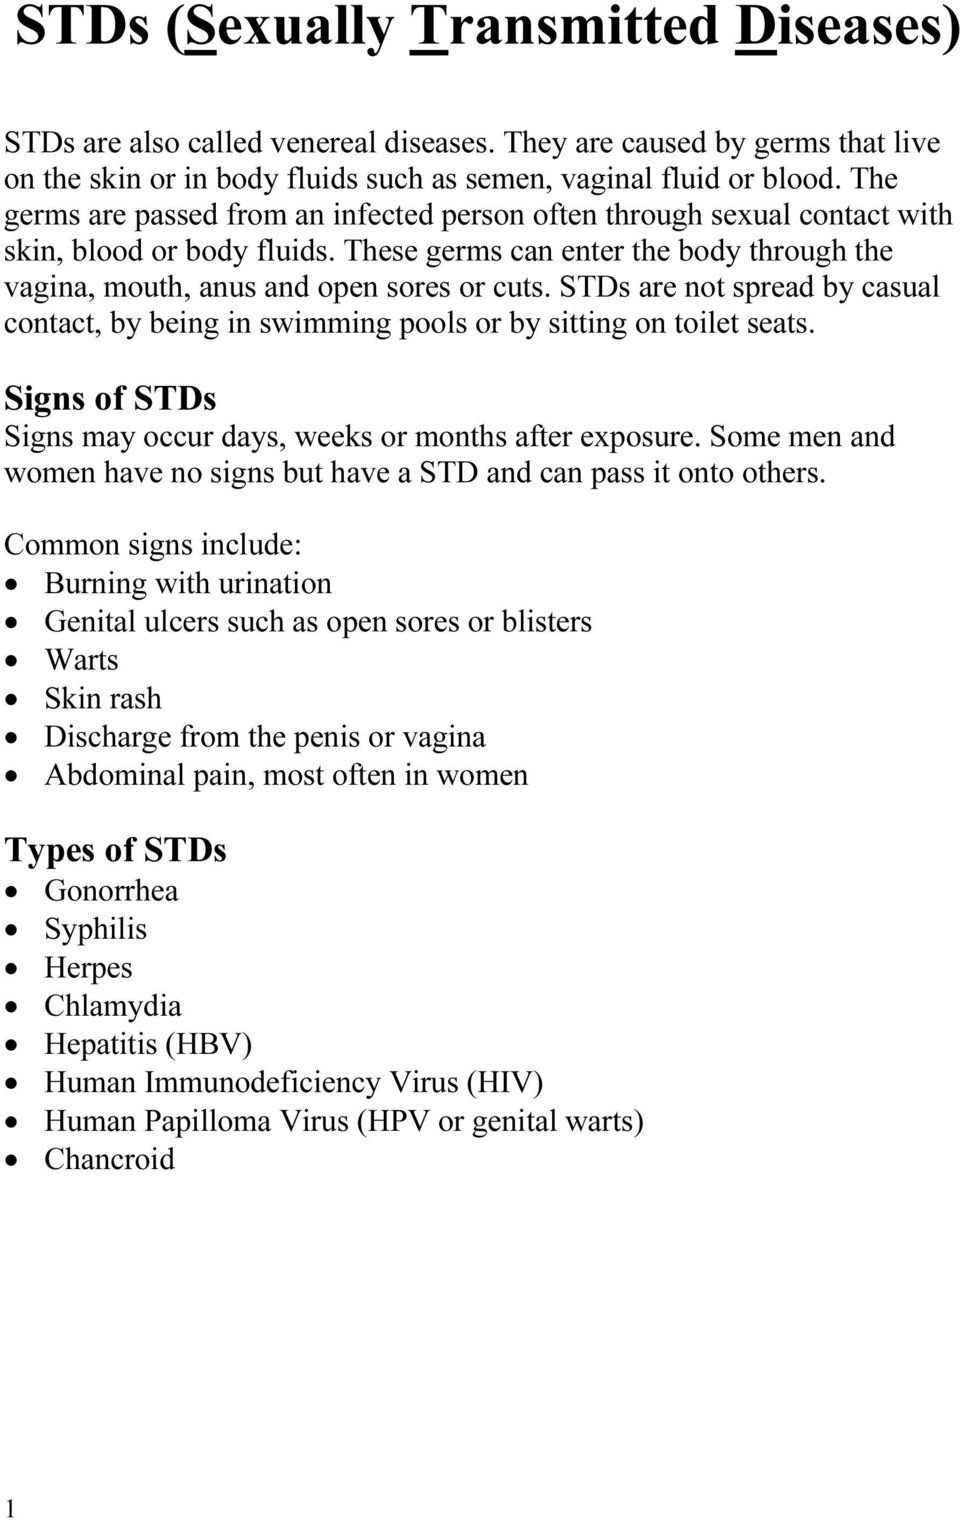 STDs are not spread by casual contact, by being in swimming pools or by sitting on toilet seats. Signs of STDs Signs may occur days, weeks or months after exposure.